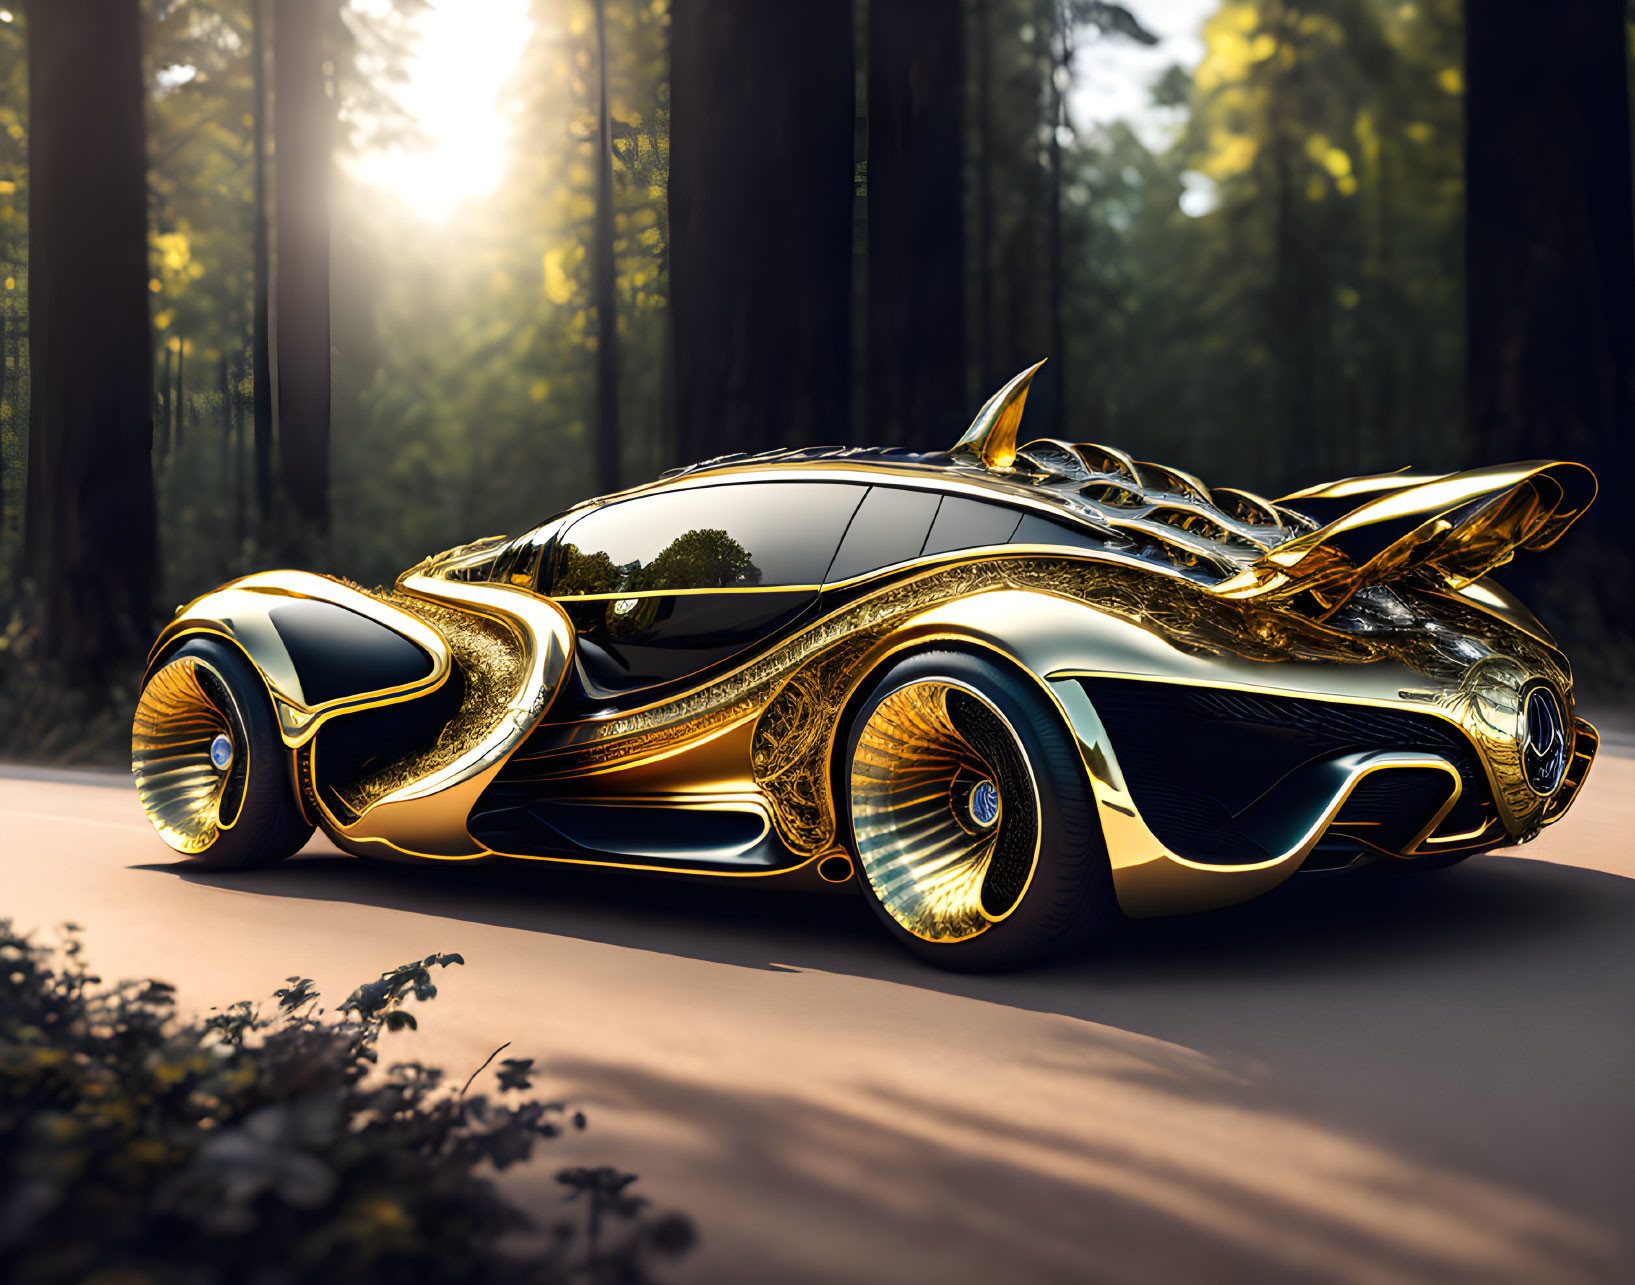 Sleek Black and Gold Futuristic Car in Forest at Sunset